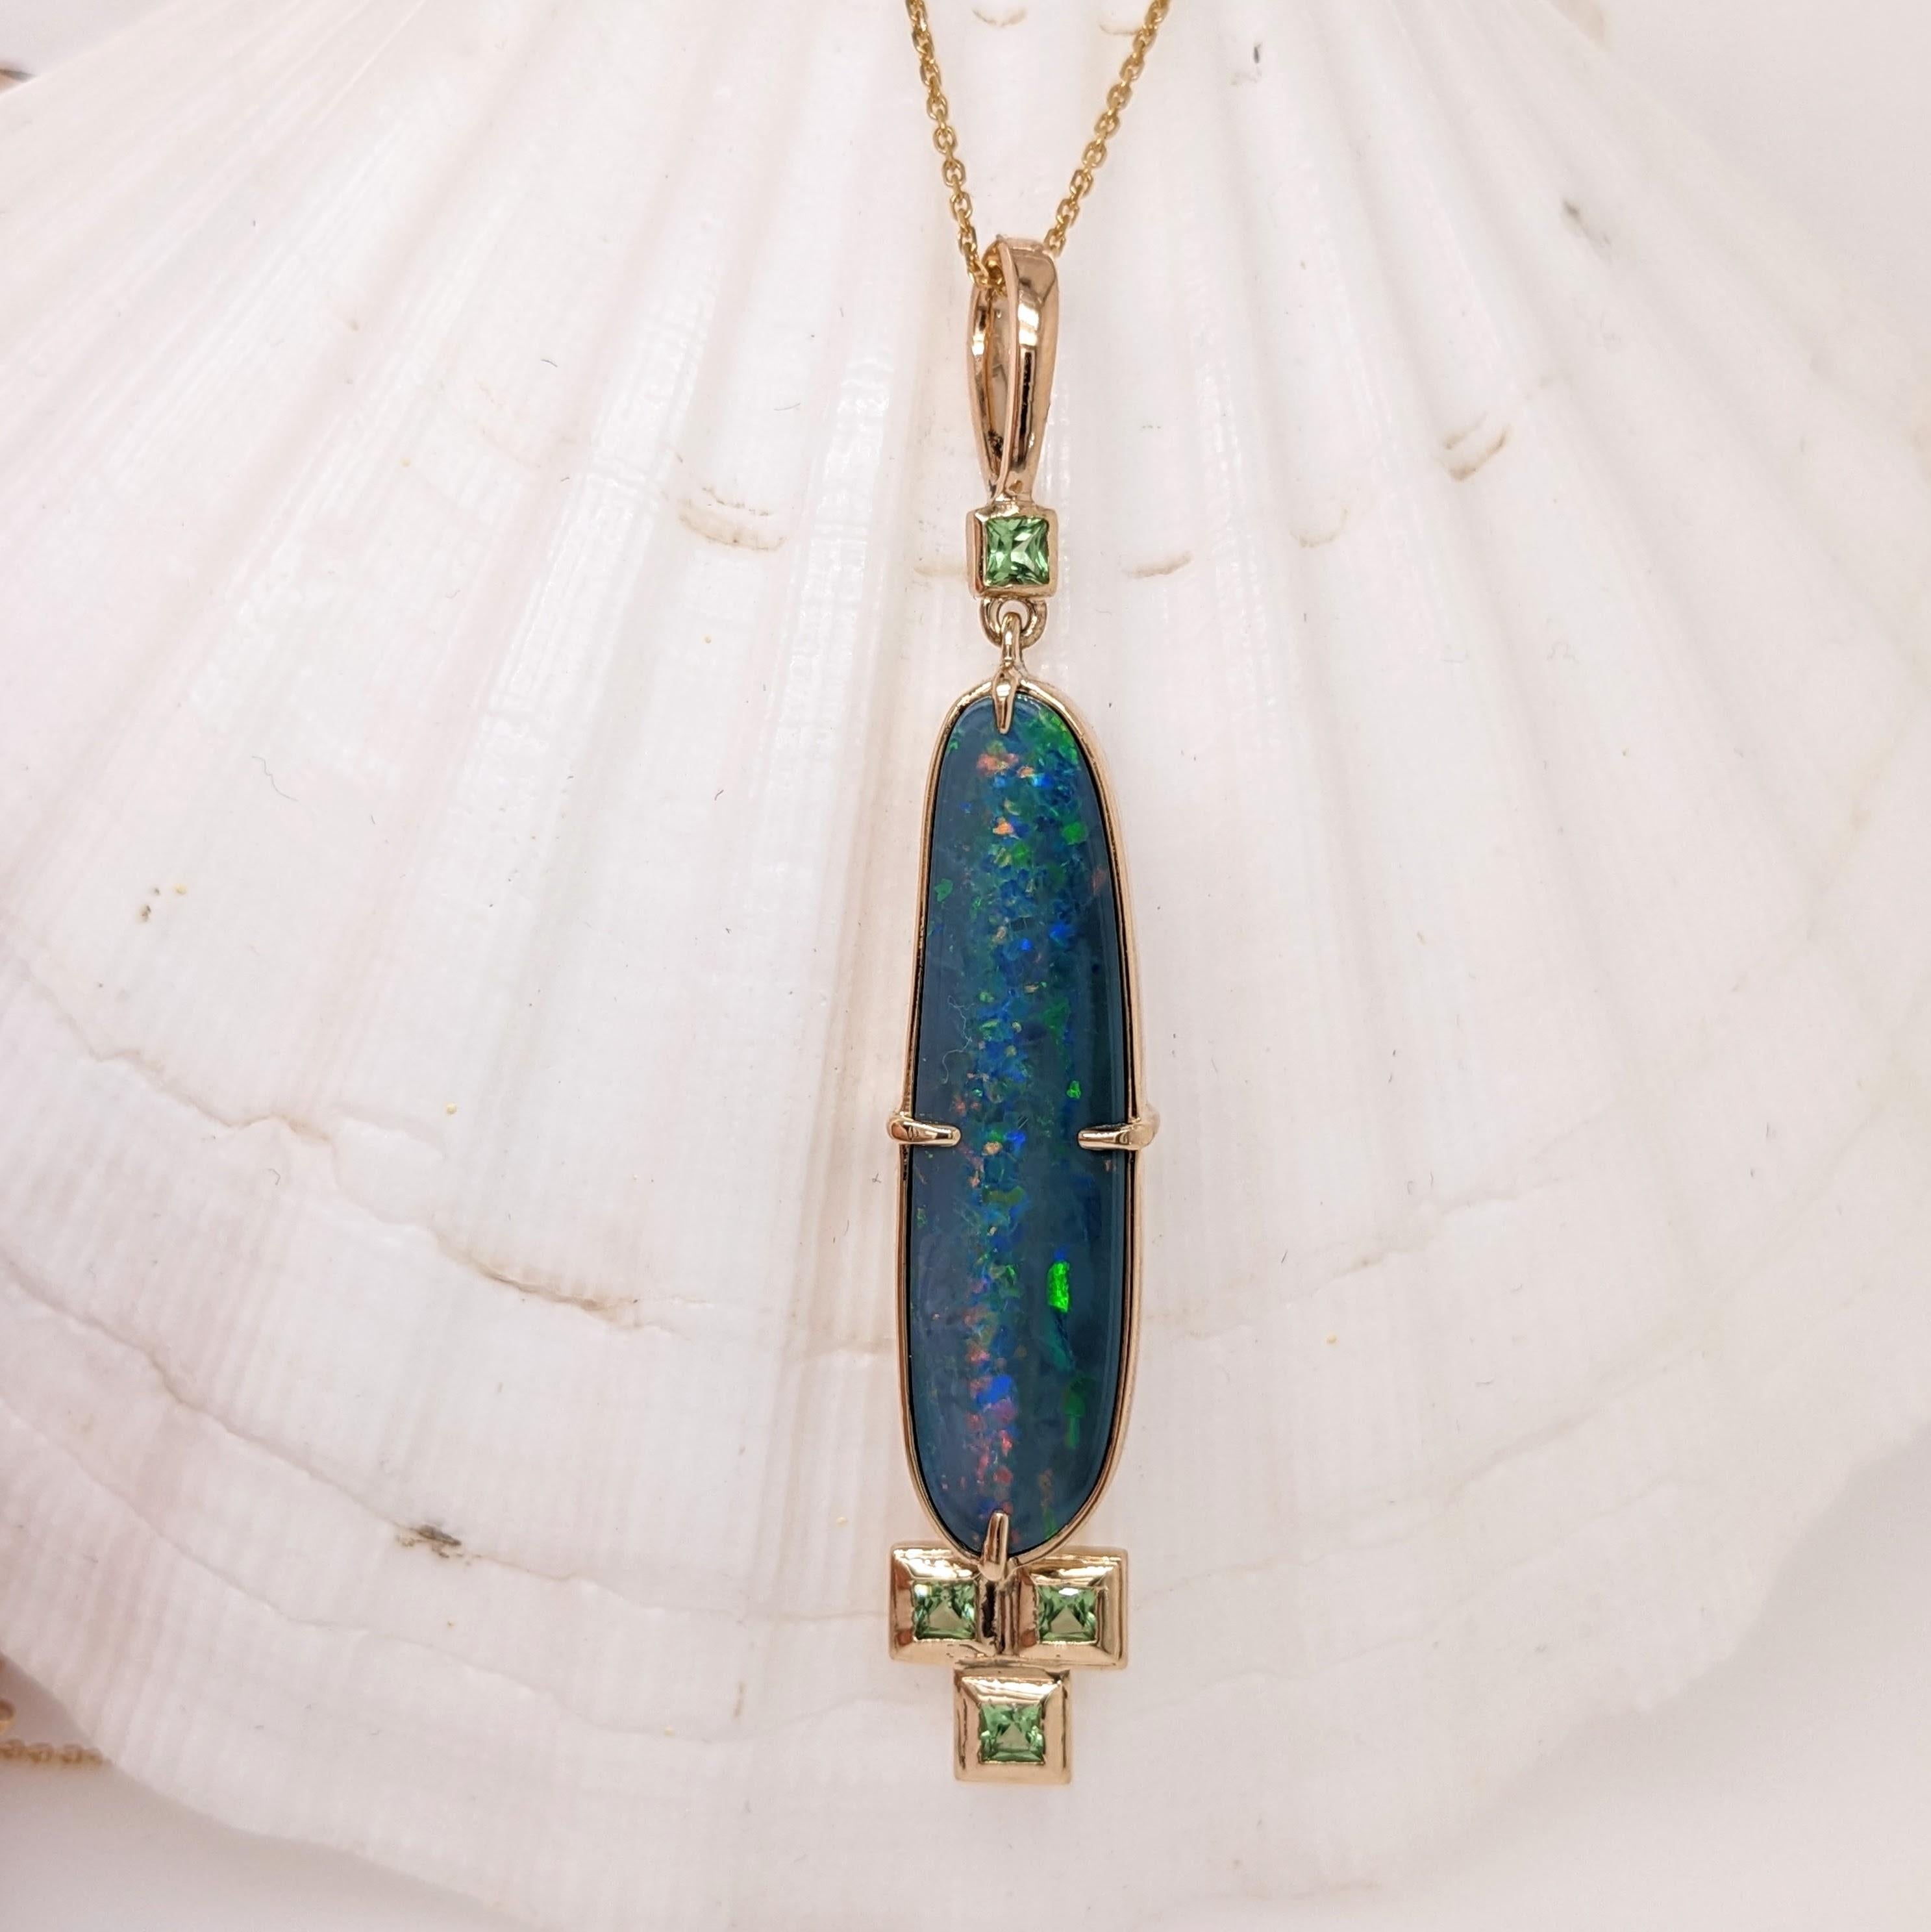 This beautiful pendant features a 5.55 carat oval boulder opal with 4 tsavorites, one at the top and 3 at the bottom of the opal, all set in solid 14K gold. This pendant is a statement piece showcasing the beauty of the opal. 

Specifications

Item